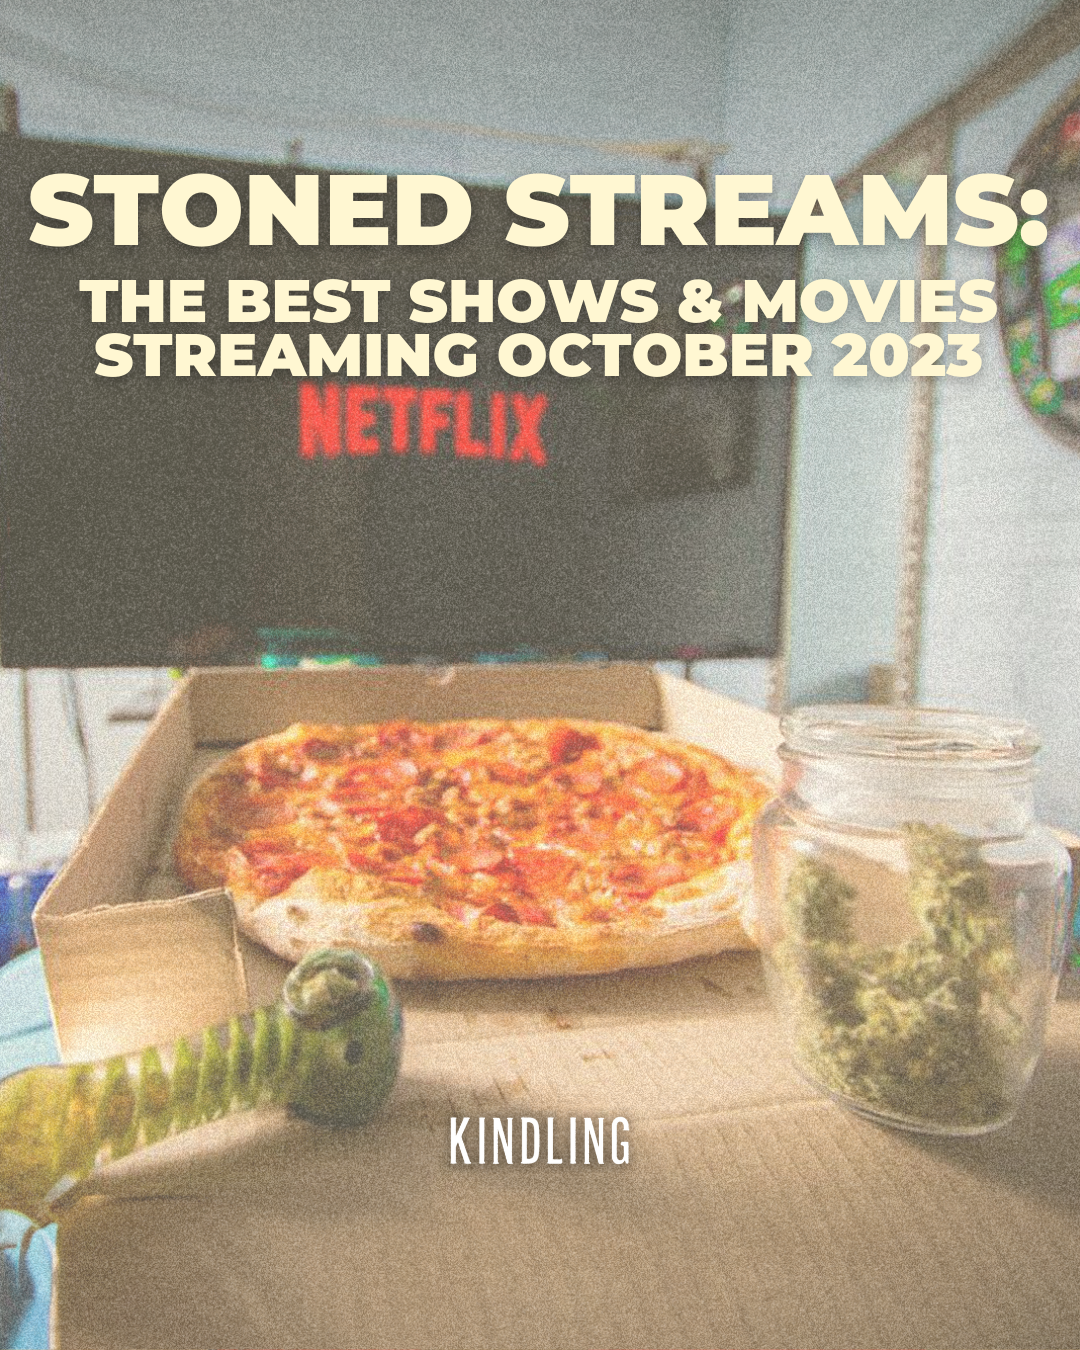 Stoned Streams: The Best Shows & Movies Streaming October 2023